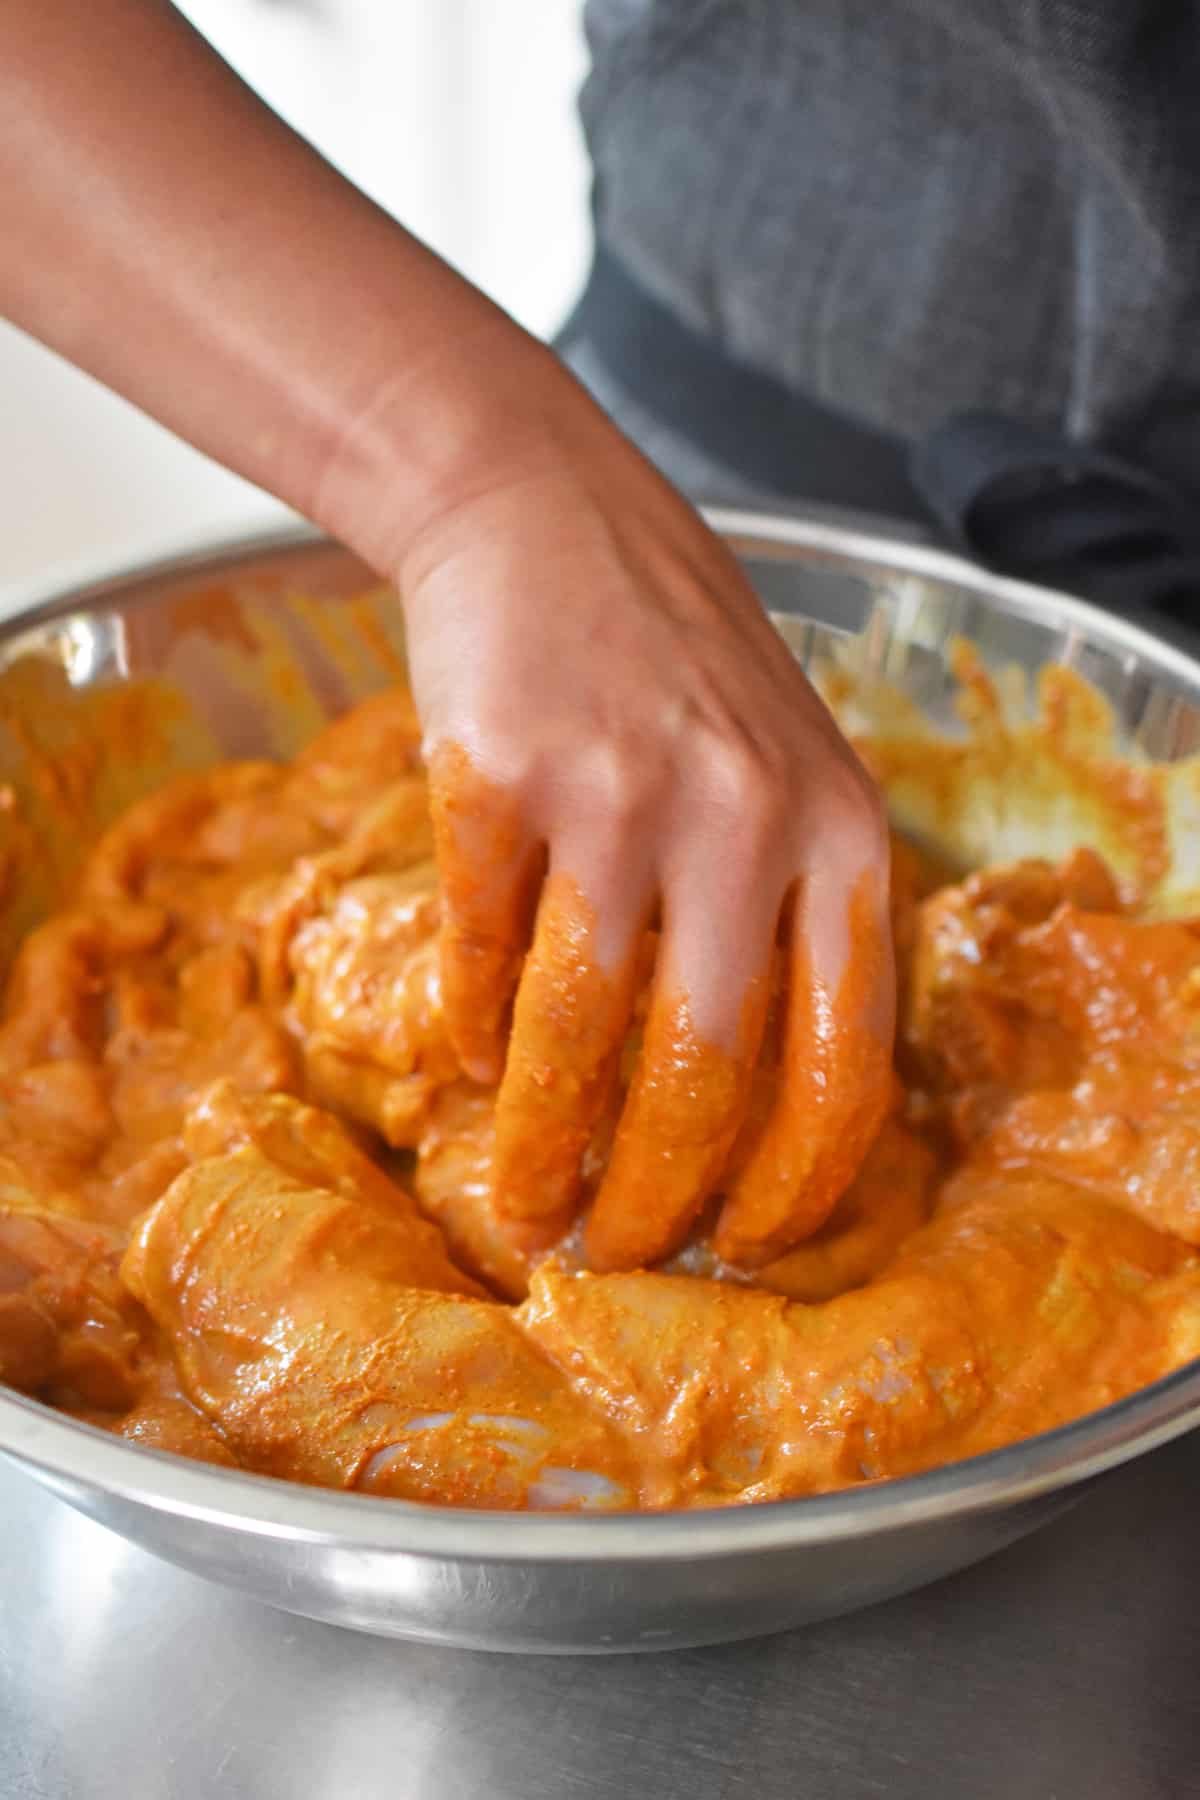 A hand is tossing raw chicken thighs in a bright orange colored tandoori marinade.